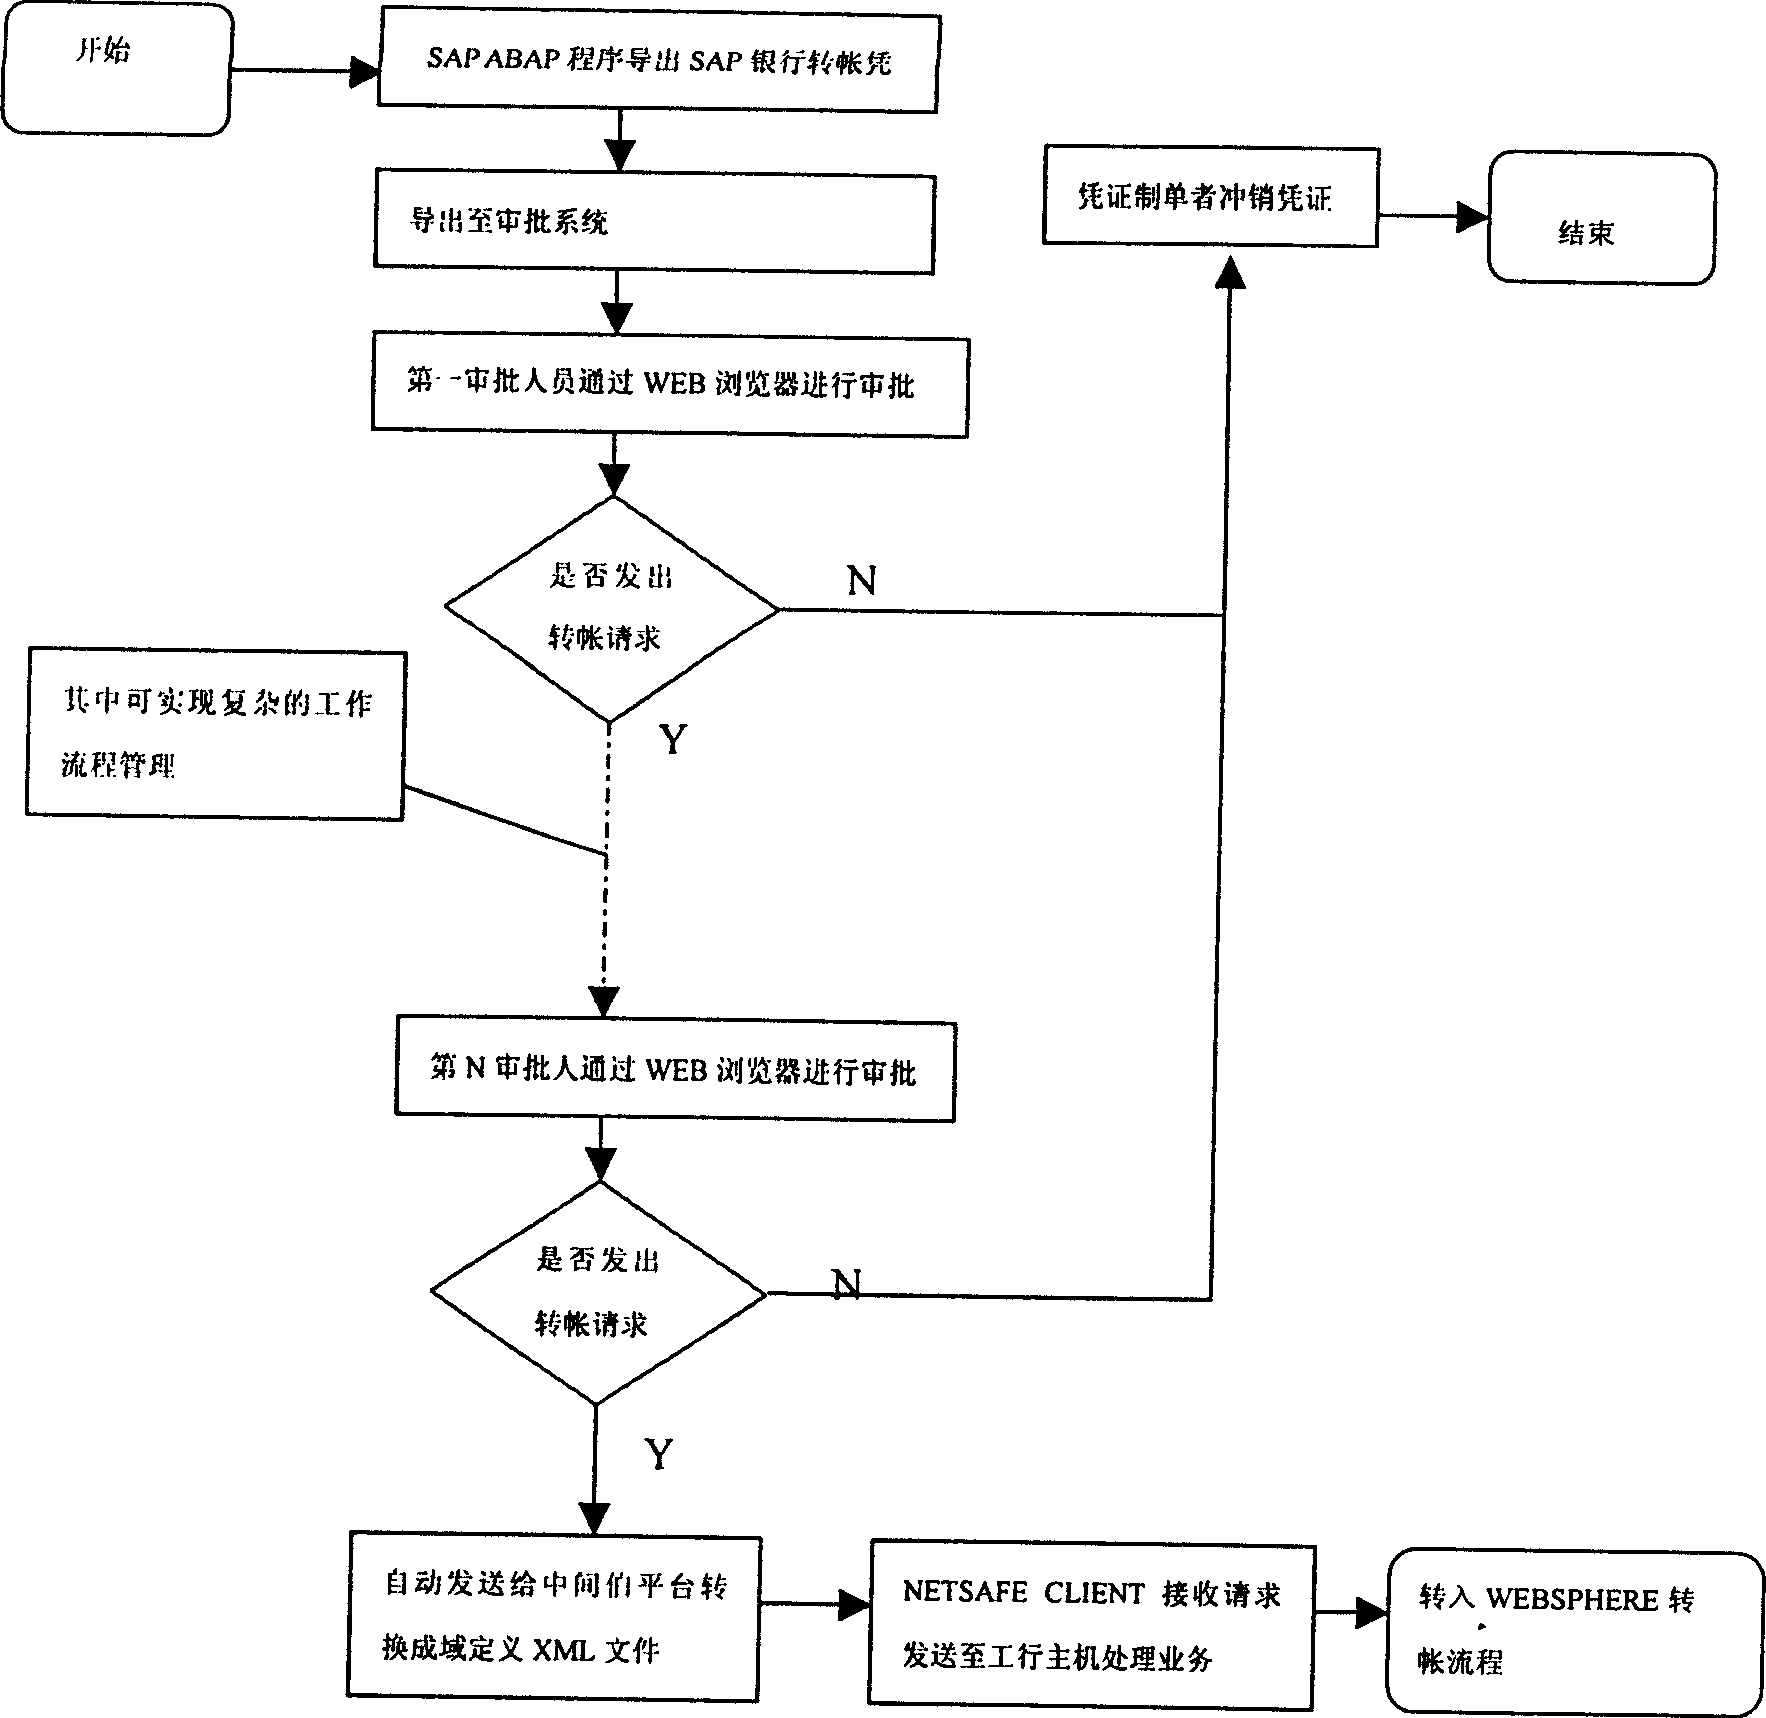 Network bank trade system and method between enterprise and bank